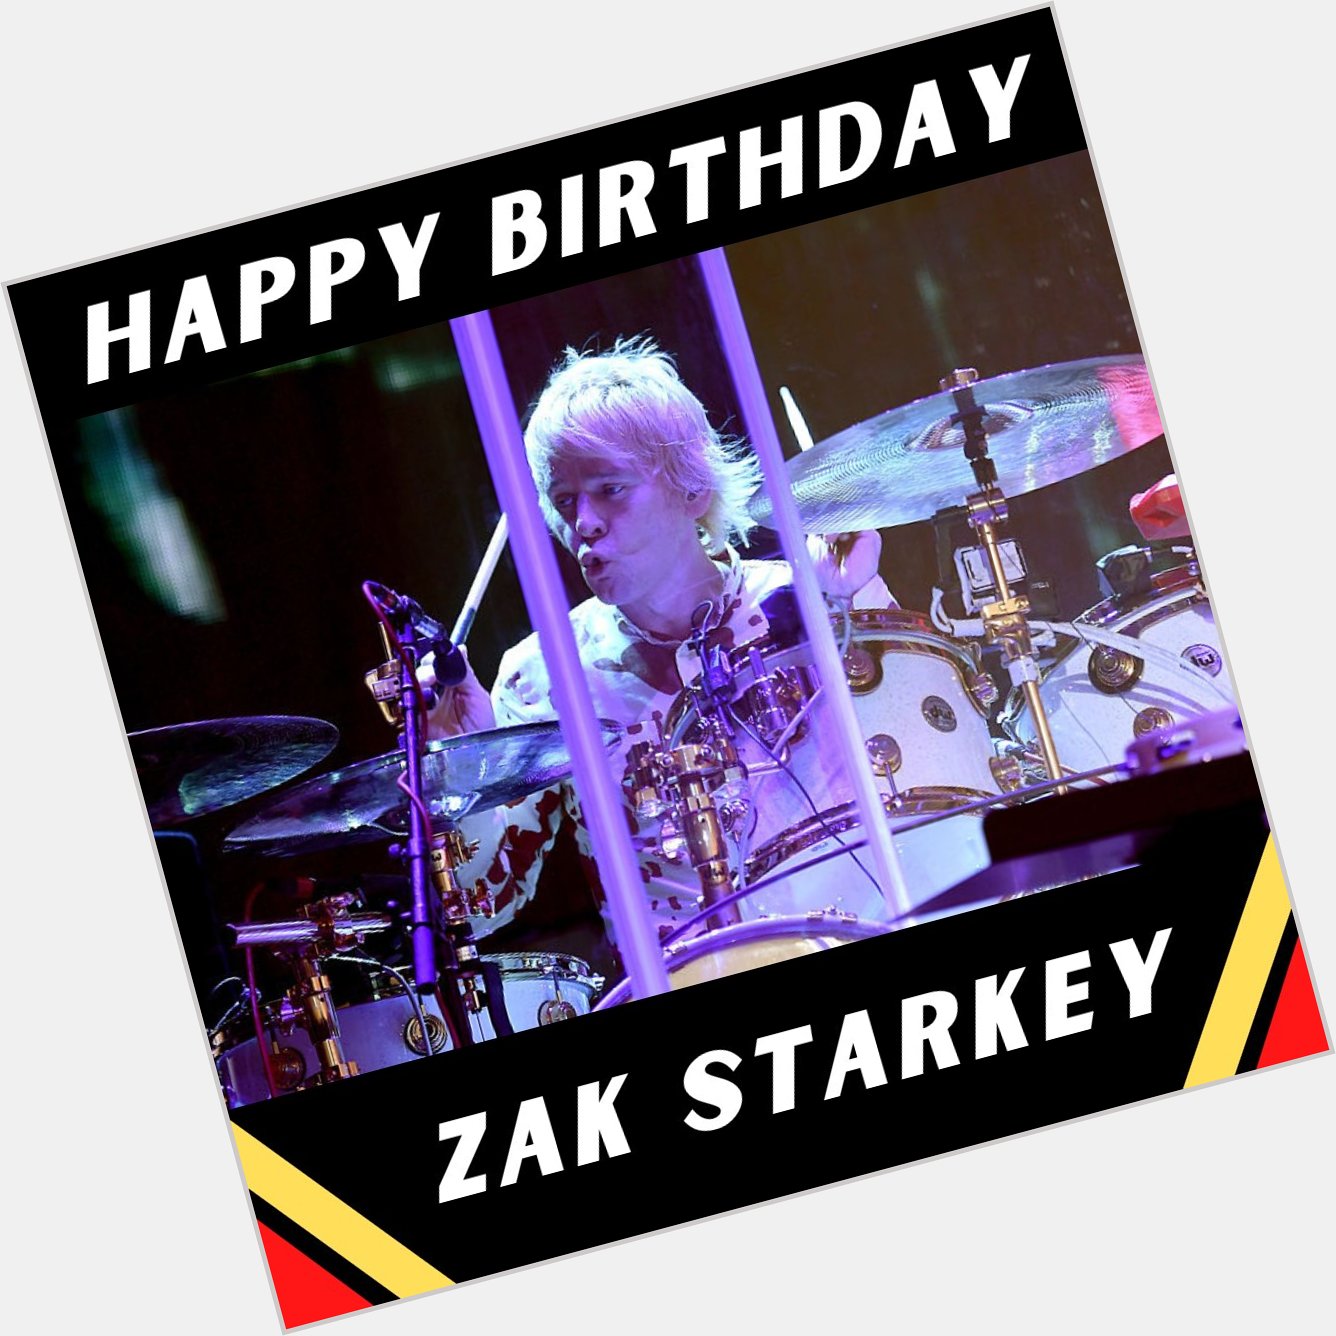 Wishing a happy birthday to Zak Starkey of the Who Photo by Kevin Winter/Getty Images 